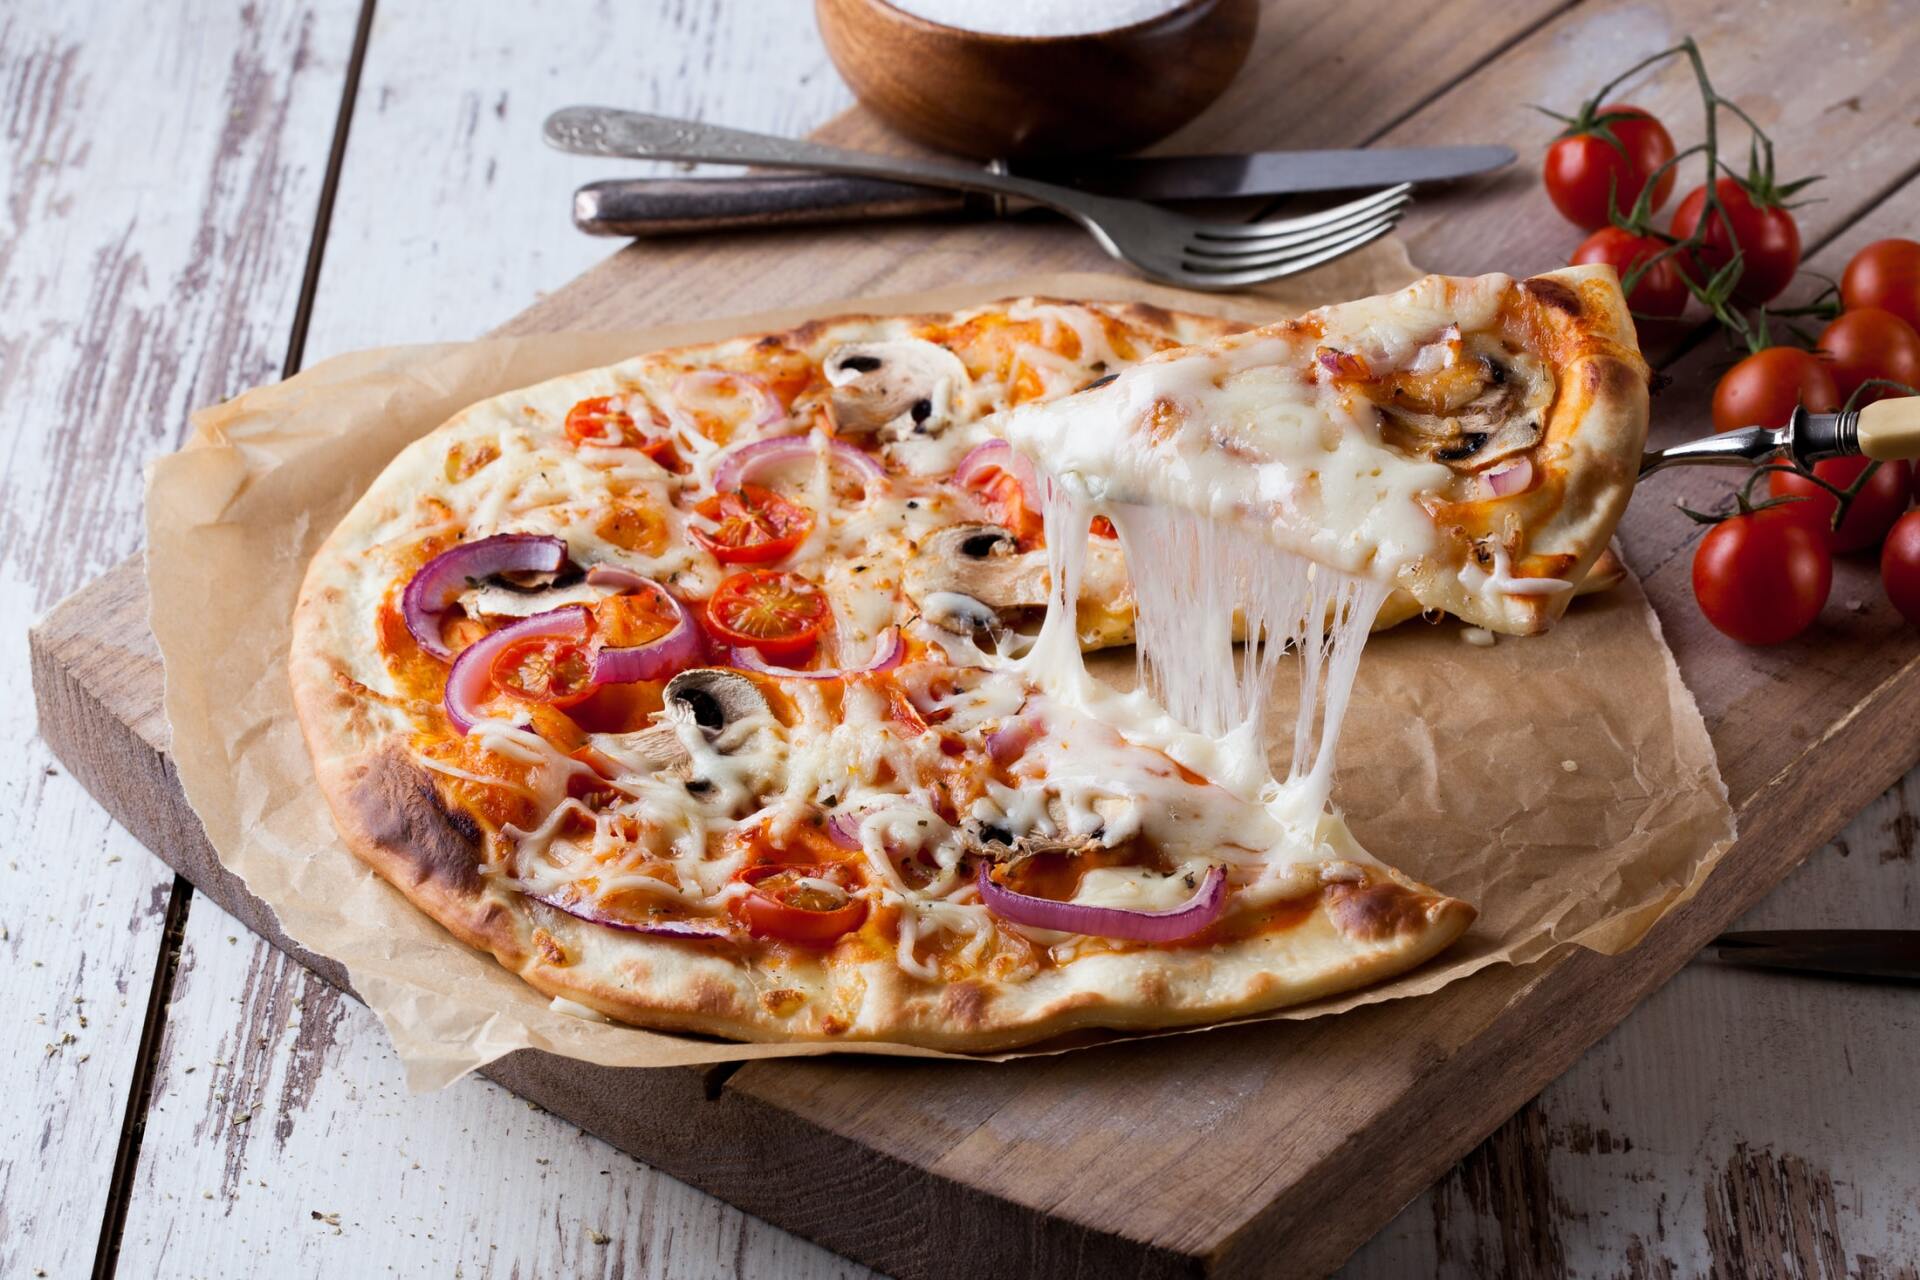 Pizza dough and melted cheese are a perfect example of dynamic contrast food